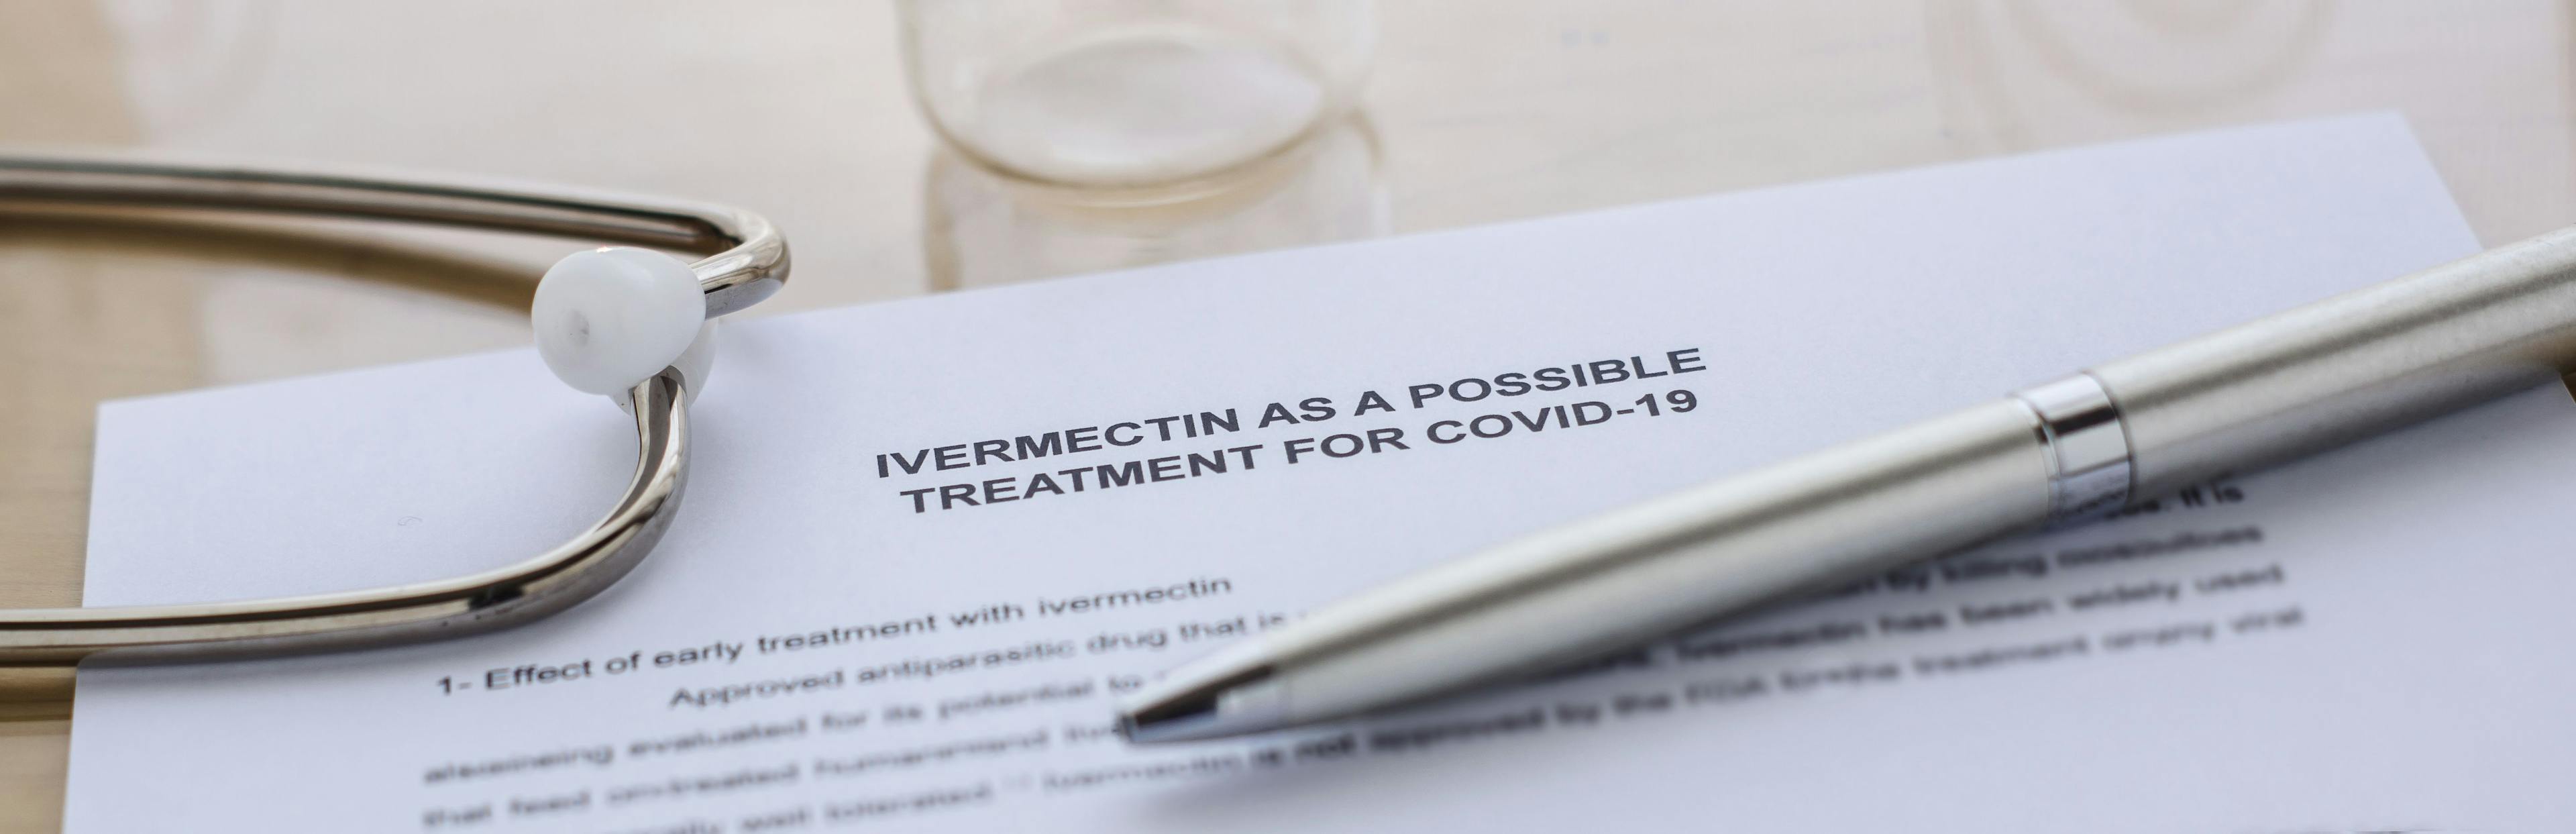 Study Finds Ivermectin Does Not Reduce COVID-19 Disease Severity